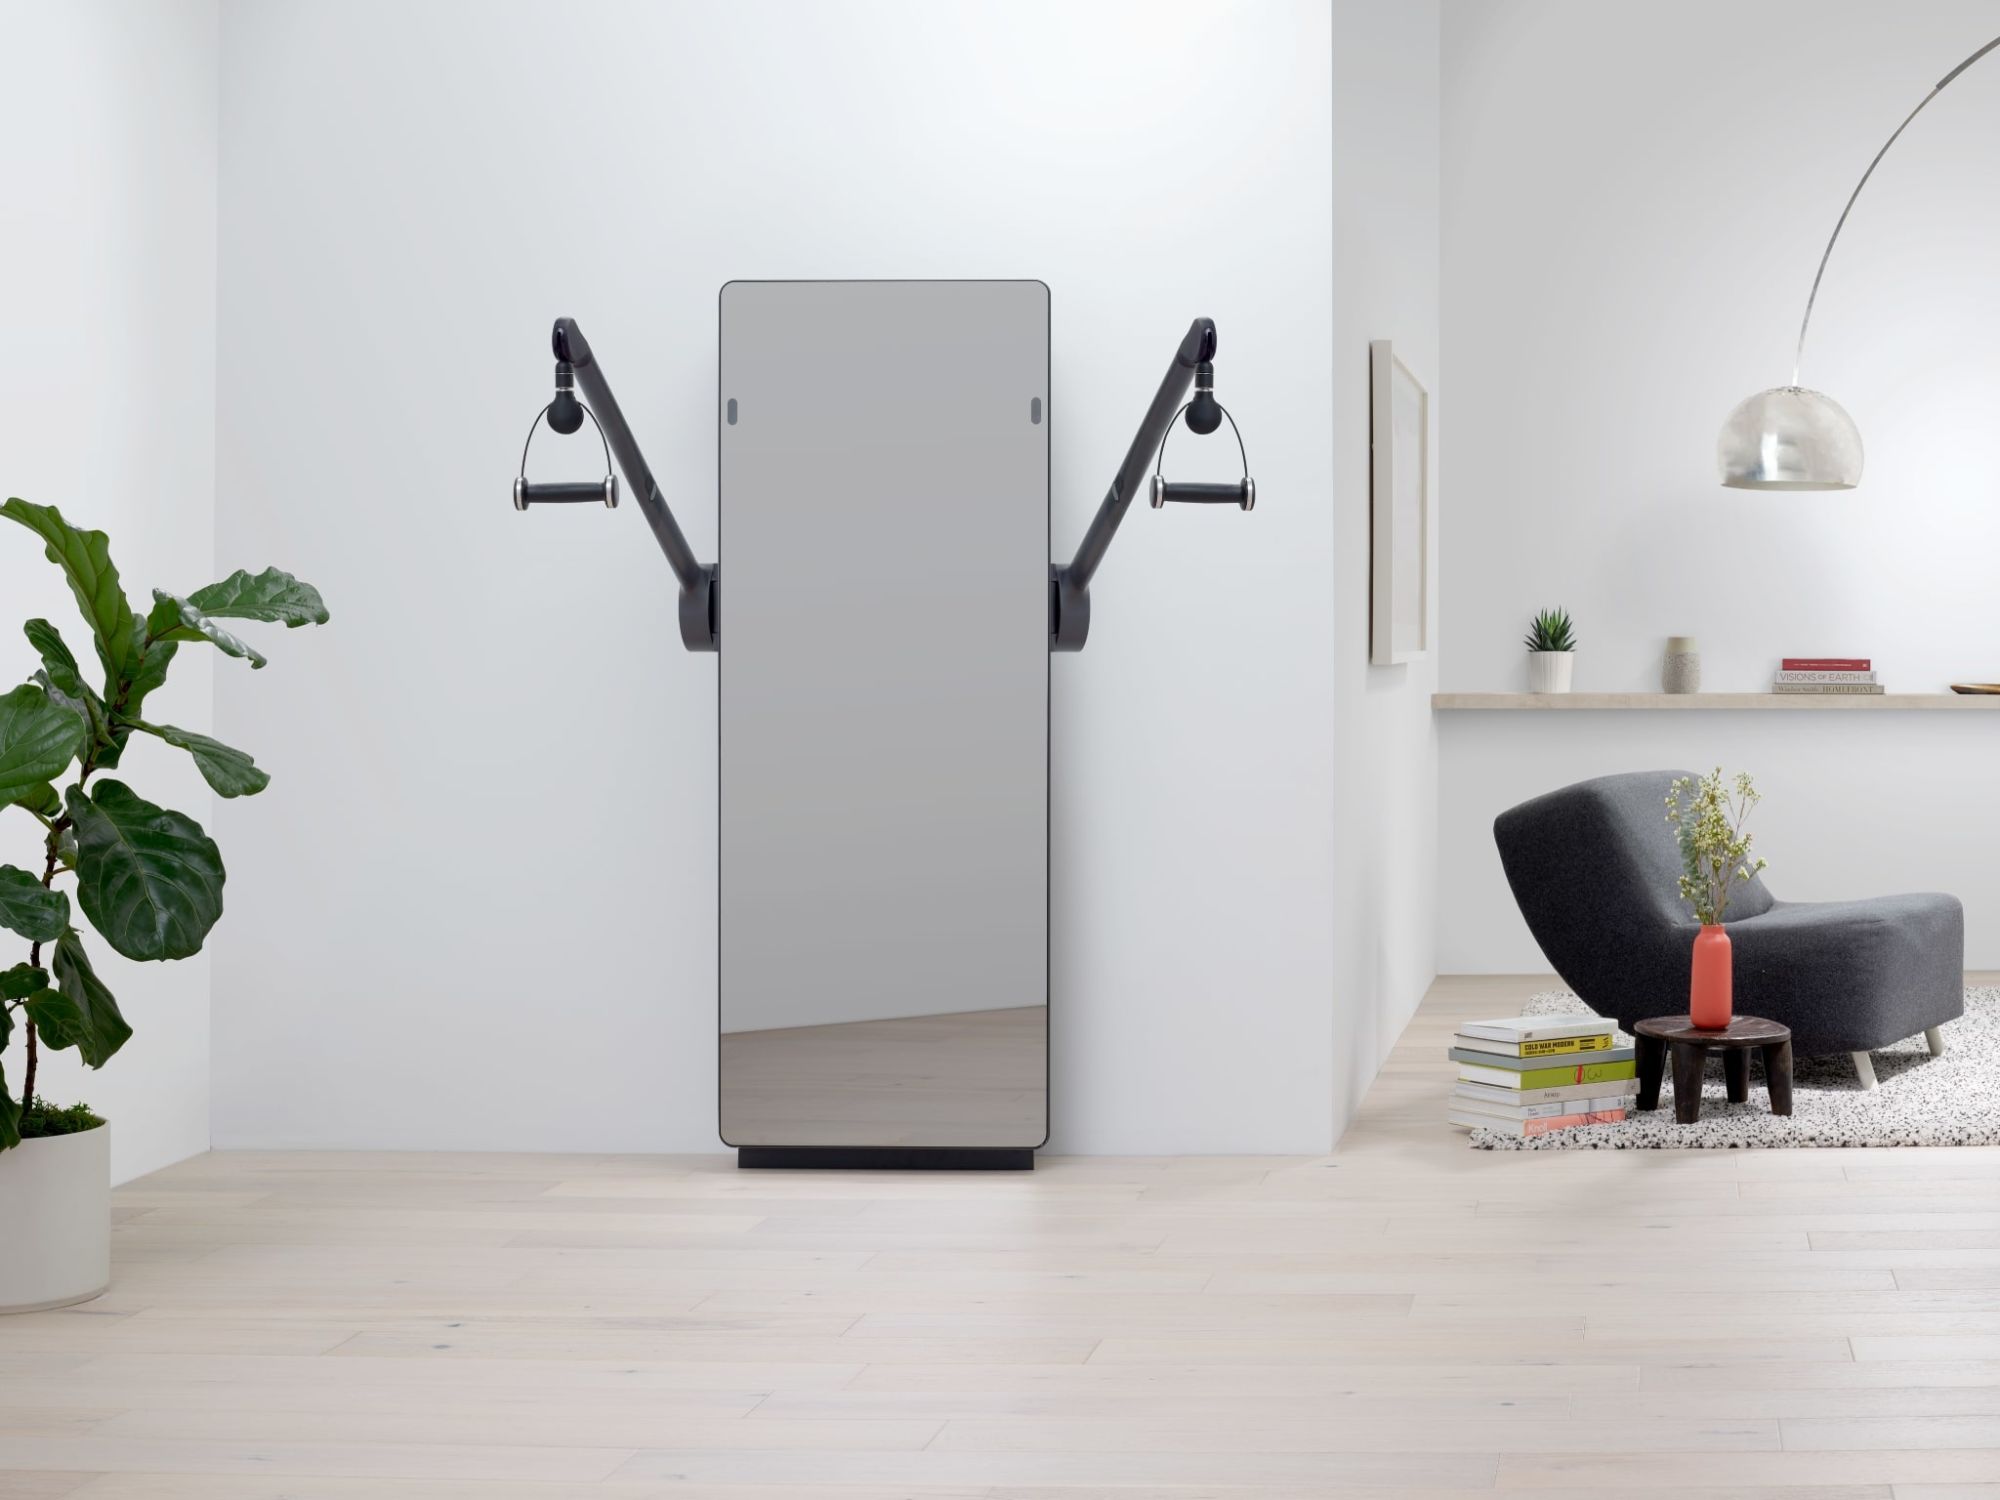 Is this AI-powered 'mirror gym' the future of home exercise?